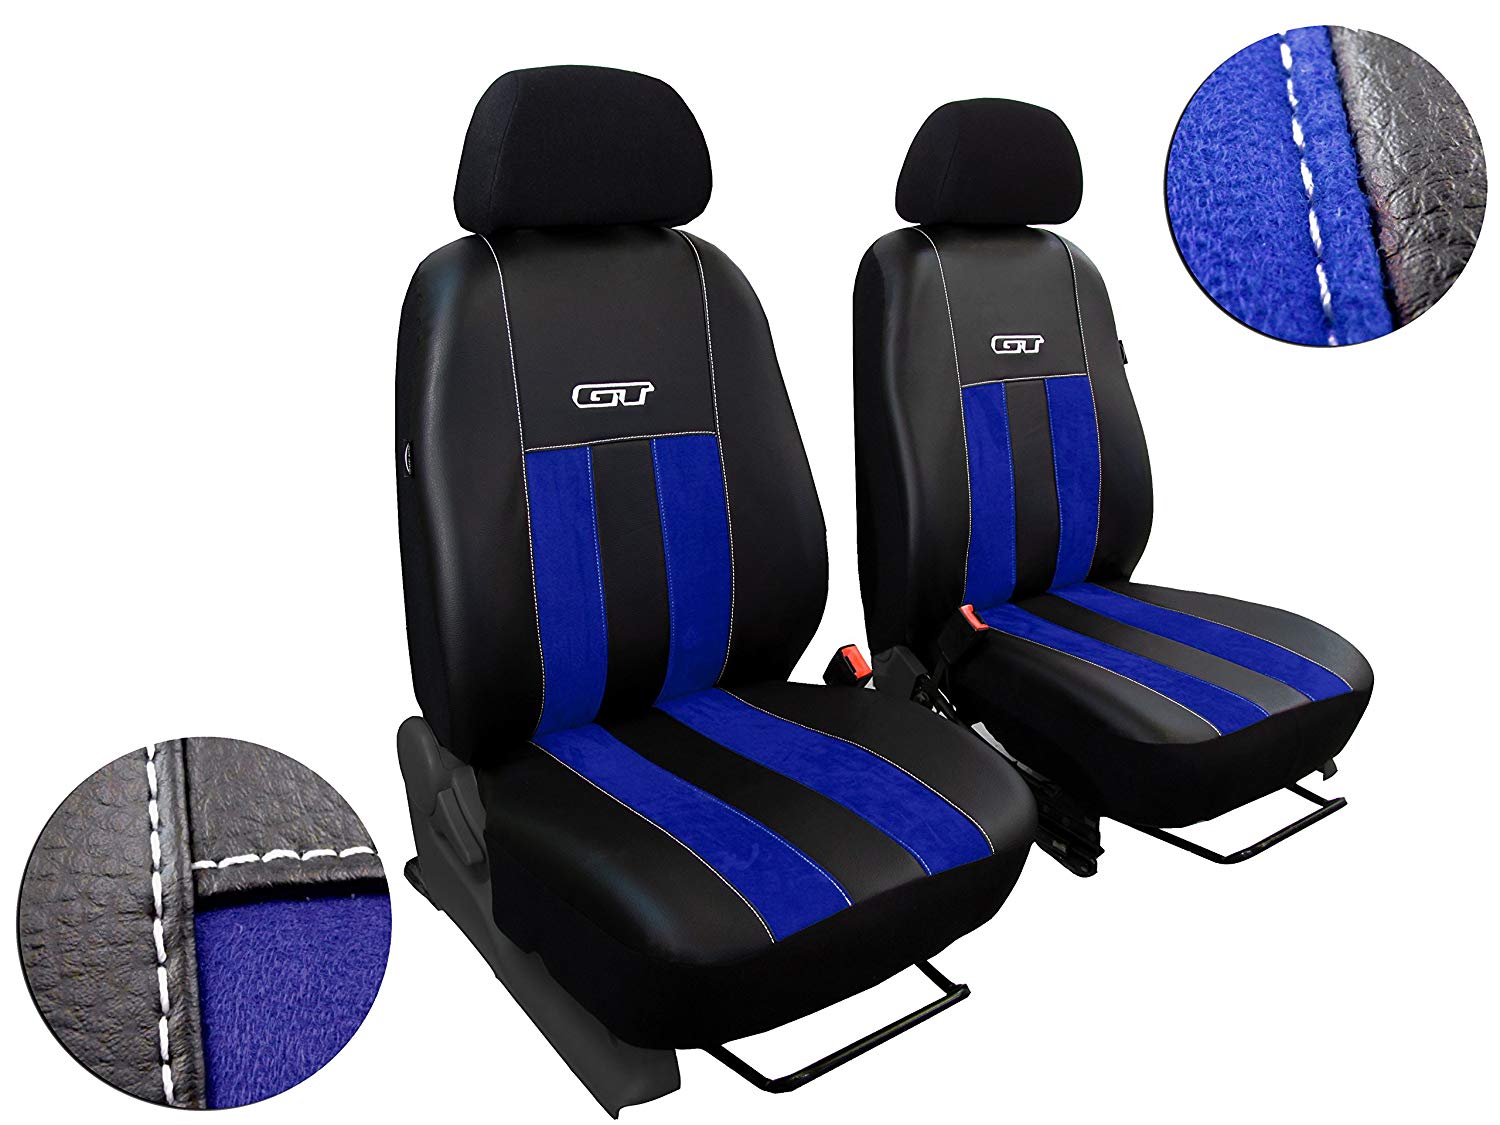 Pok Ter Tuning Front Seat Covers Suitable for A6 °C5 ALCANTRA GT with Kunstleder.. Includes Blue